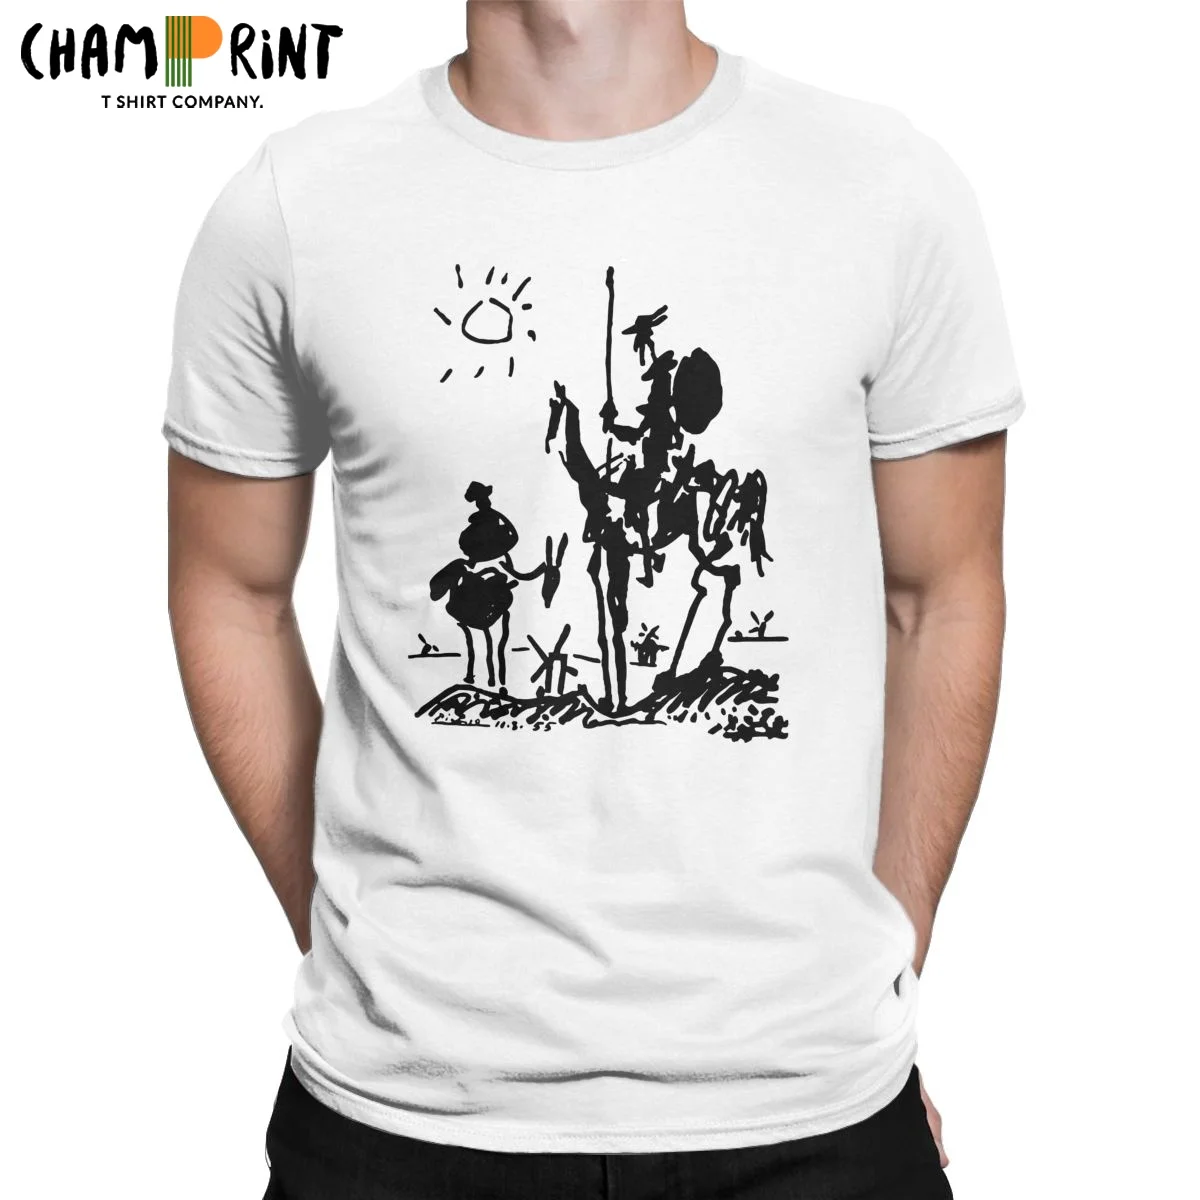 

Men's T-Shirts Picasso Art Painting Funny Cotton Tee Shirt Short Sleeve Don Quixote knight T Shirts Clothes Birthday Present